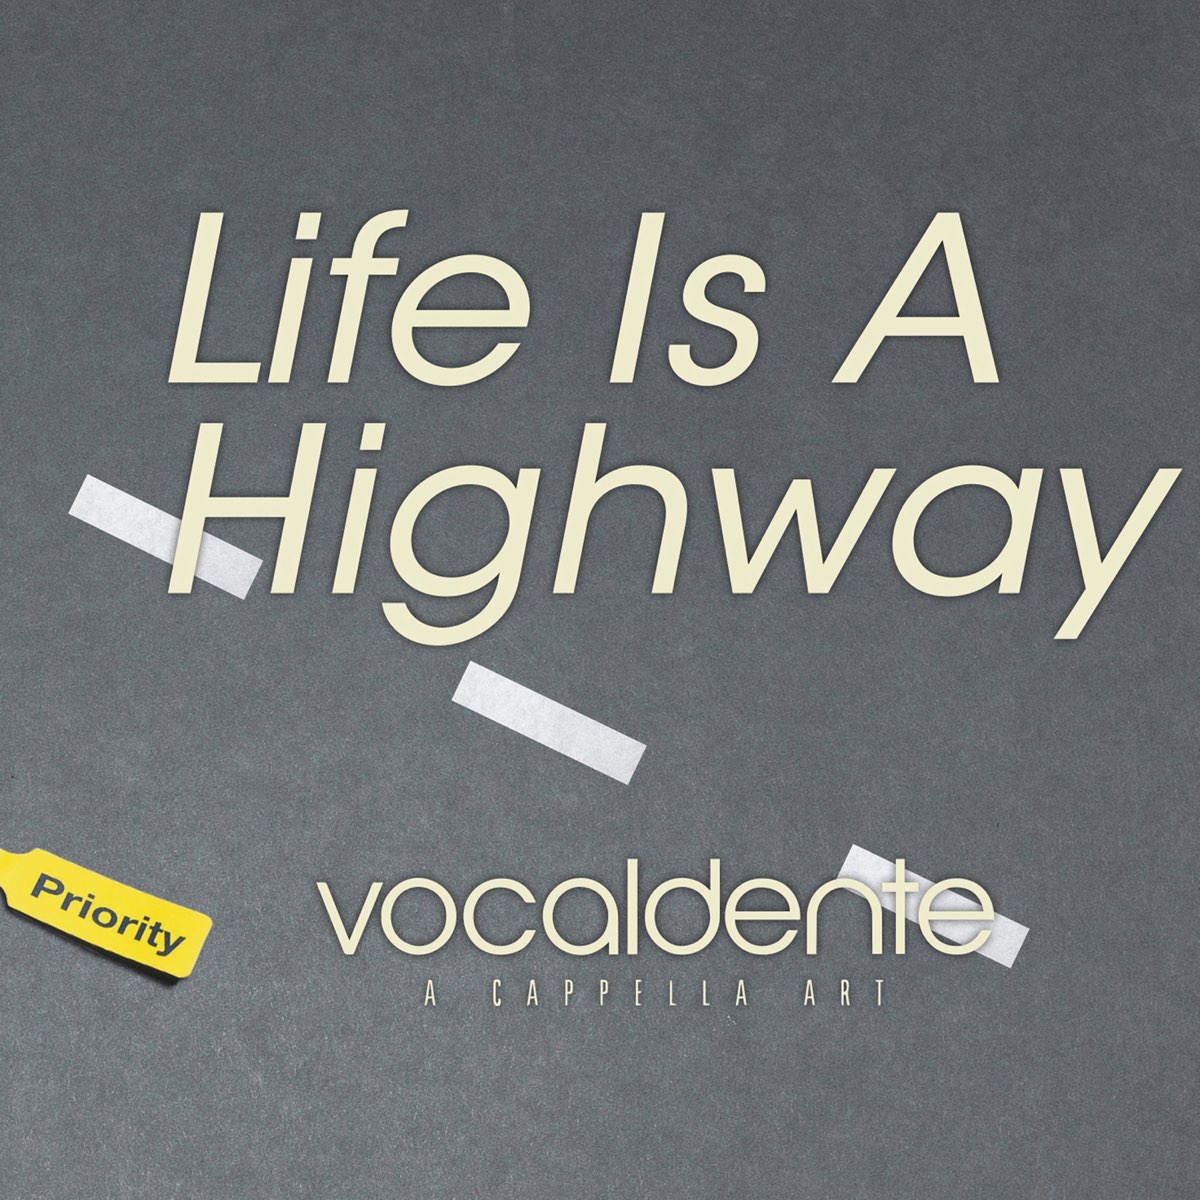 She is happy yesterday. Life is a Highway. Life is a Highway перевод. Life is a Highway Chords. Album Art Timeless Life is a Highway.